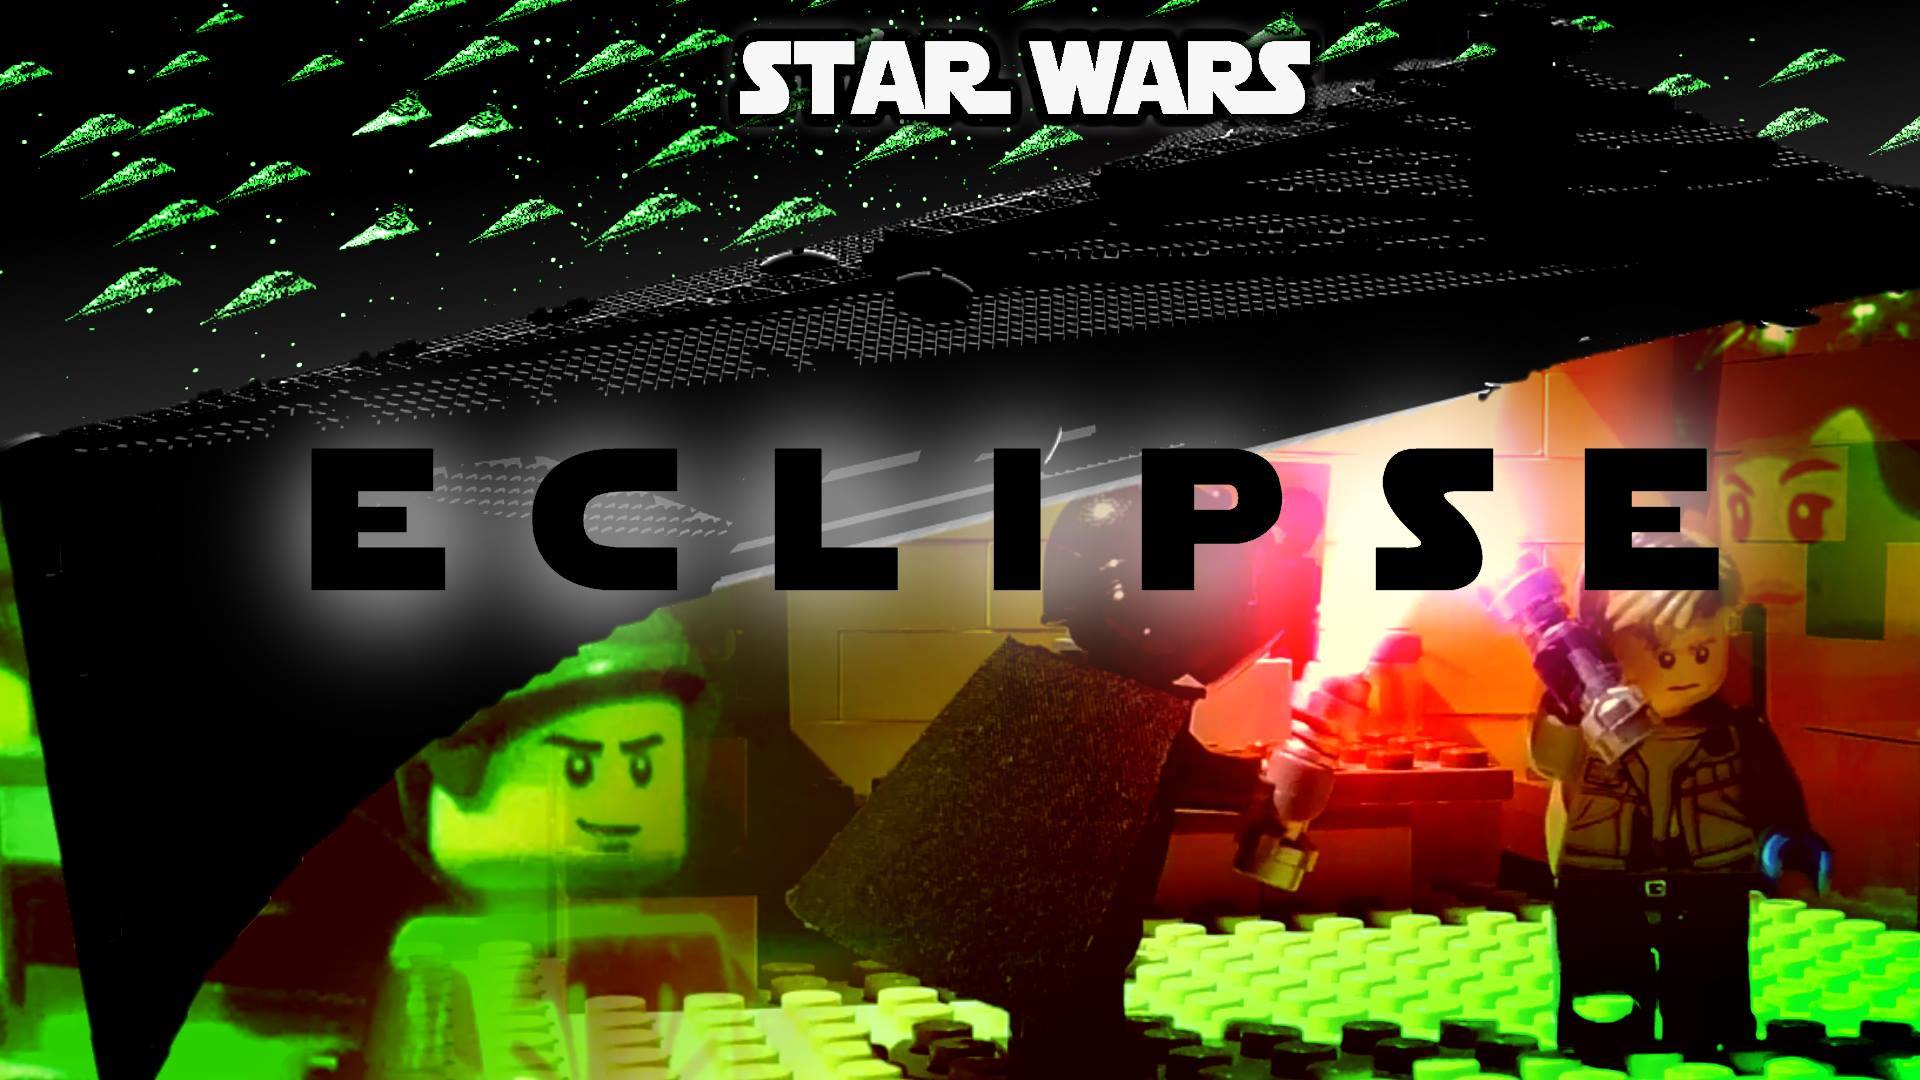 Star Wars Eclipse [engl. subs]